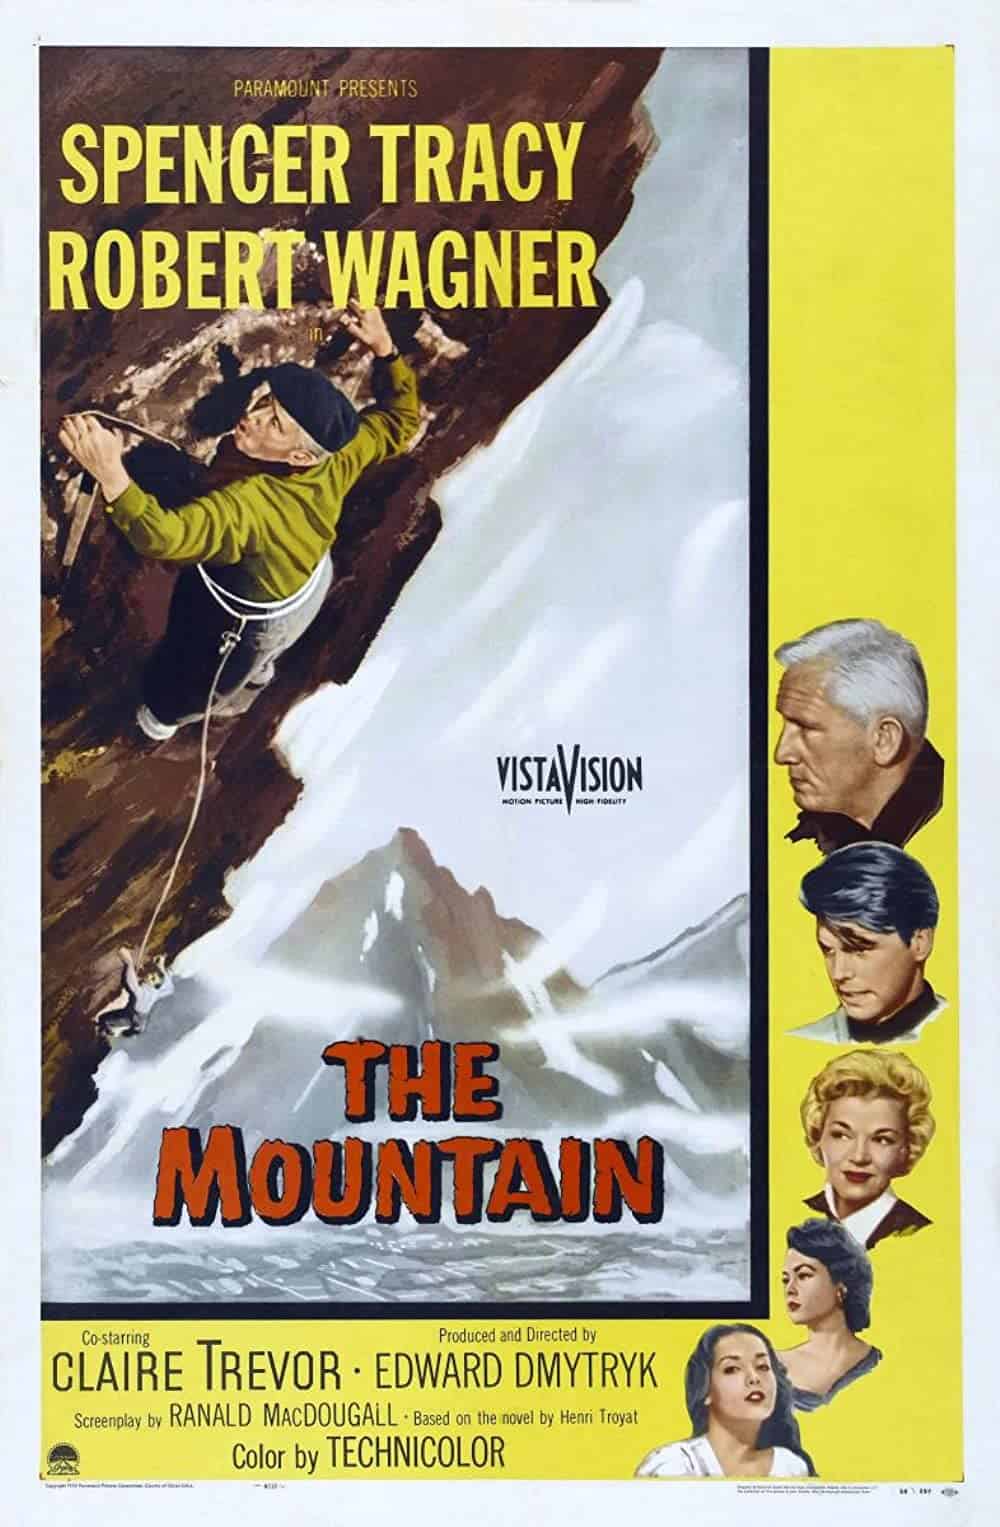 The Mountain (1956) Best Mountaineering Movies You Can't Miss